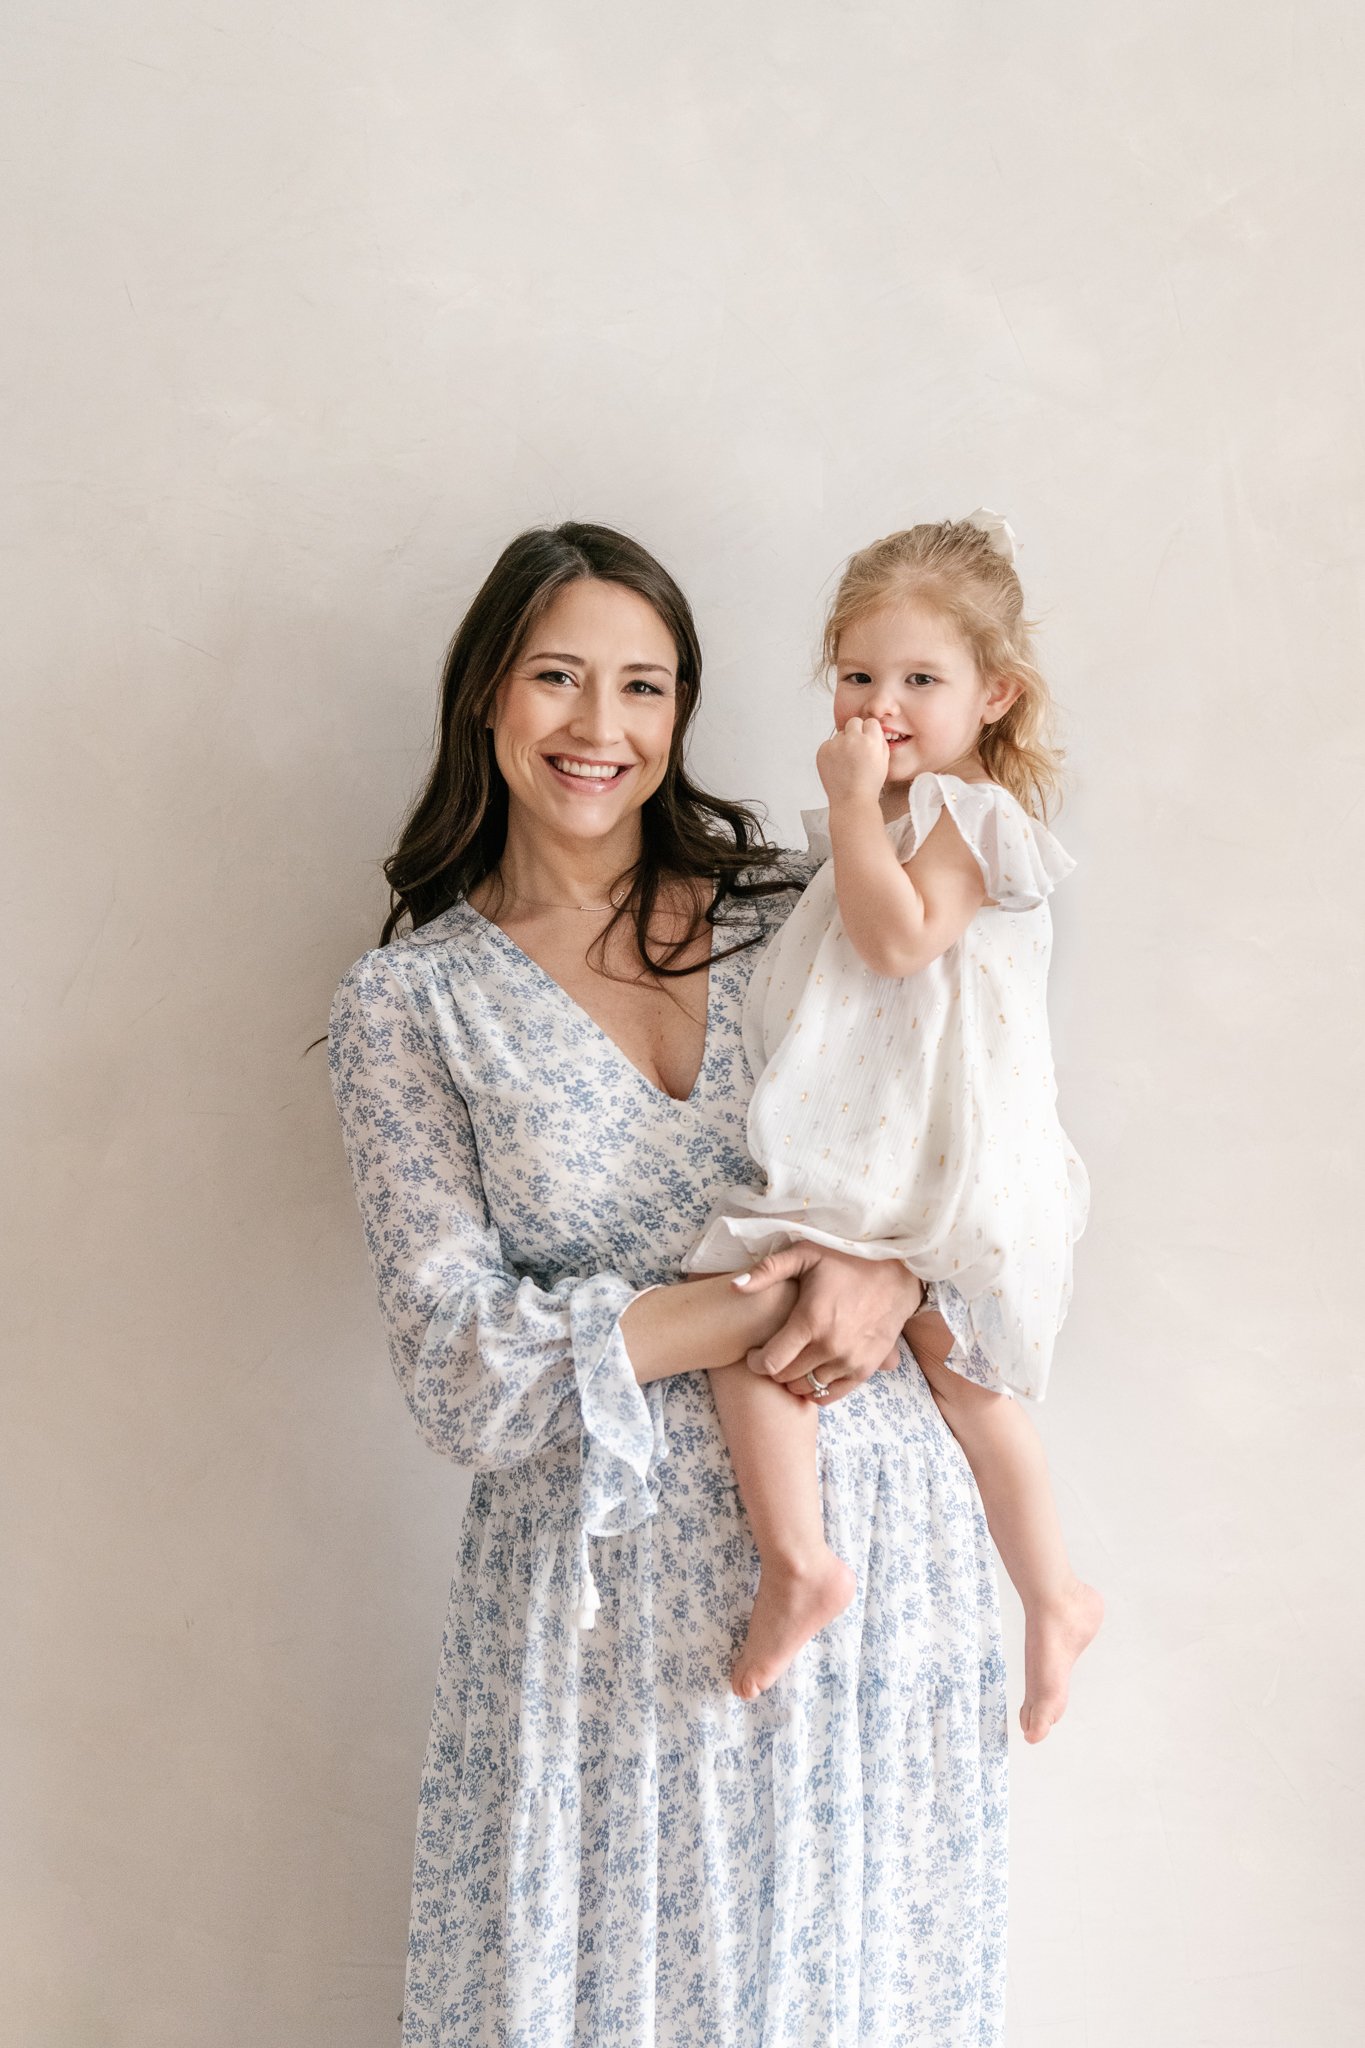  In Chatham, MA Nicole Hawkins Photography captures a portrait of a mother with her oldest child. mother and toddler girl baby girl style clean dress for pictures #NicoleHawkinsPhotography #NicoleHawkinsNewborns #Babygirl #Newbornfamilyportraits #Cha